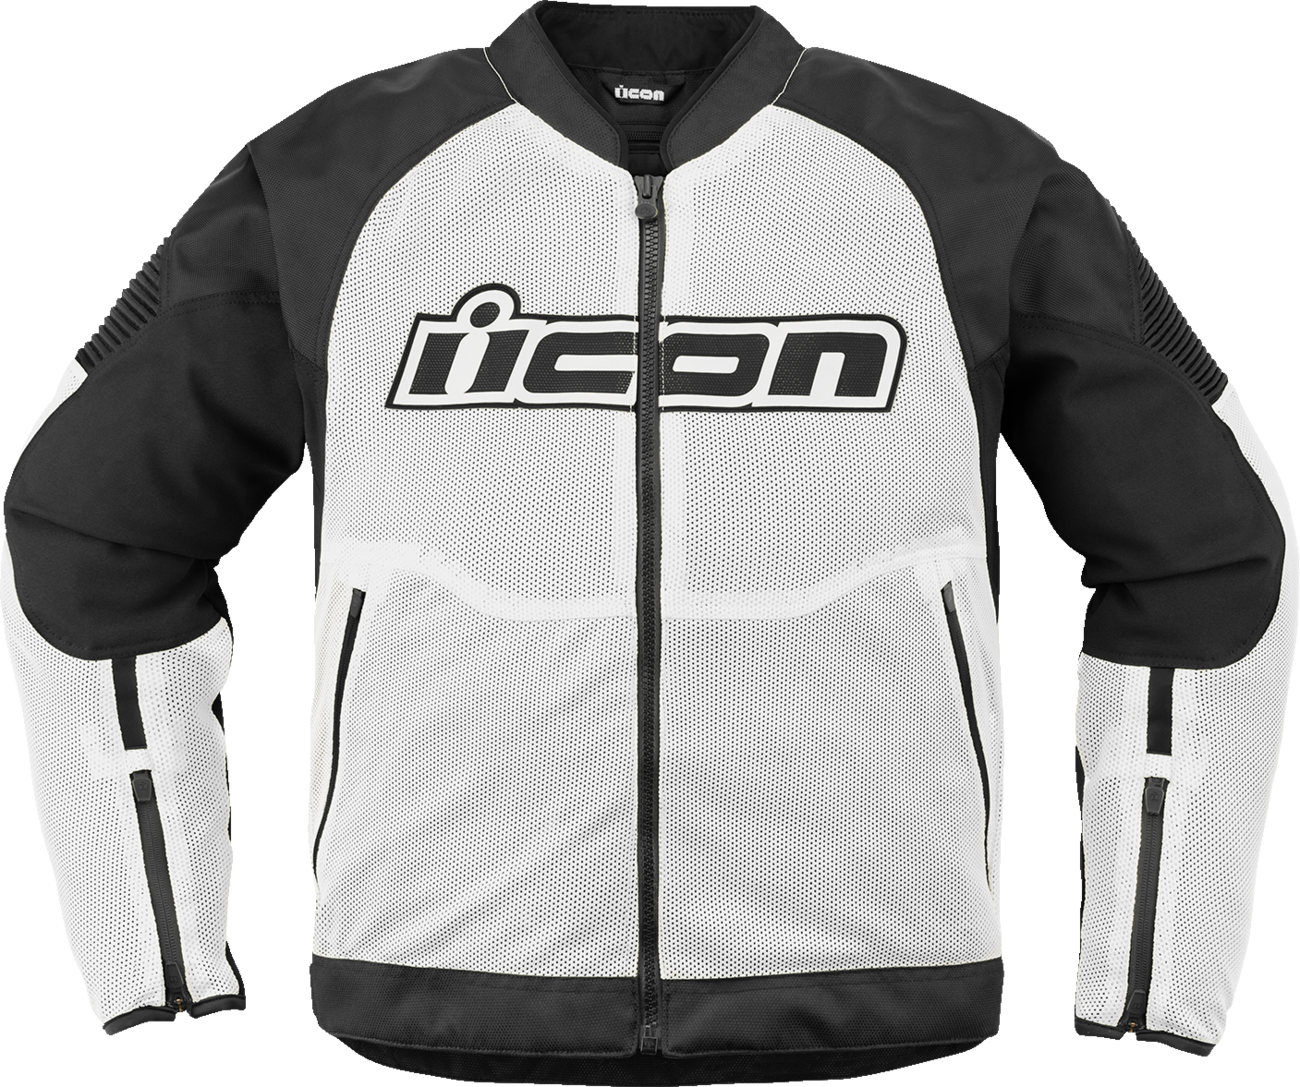 ICON Overlord3 Mesh™ CE Jacket - White - 3XL 2820-6741